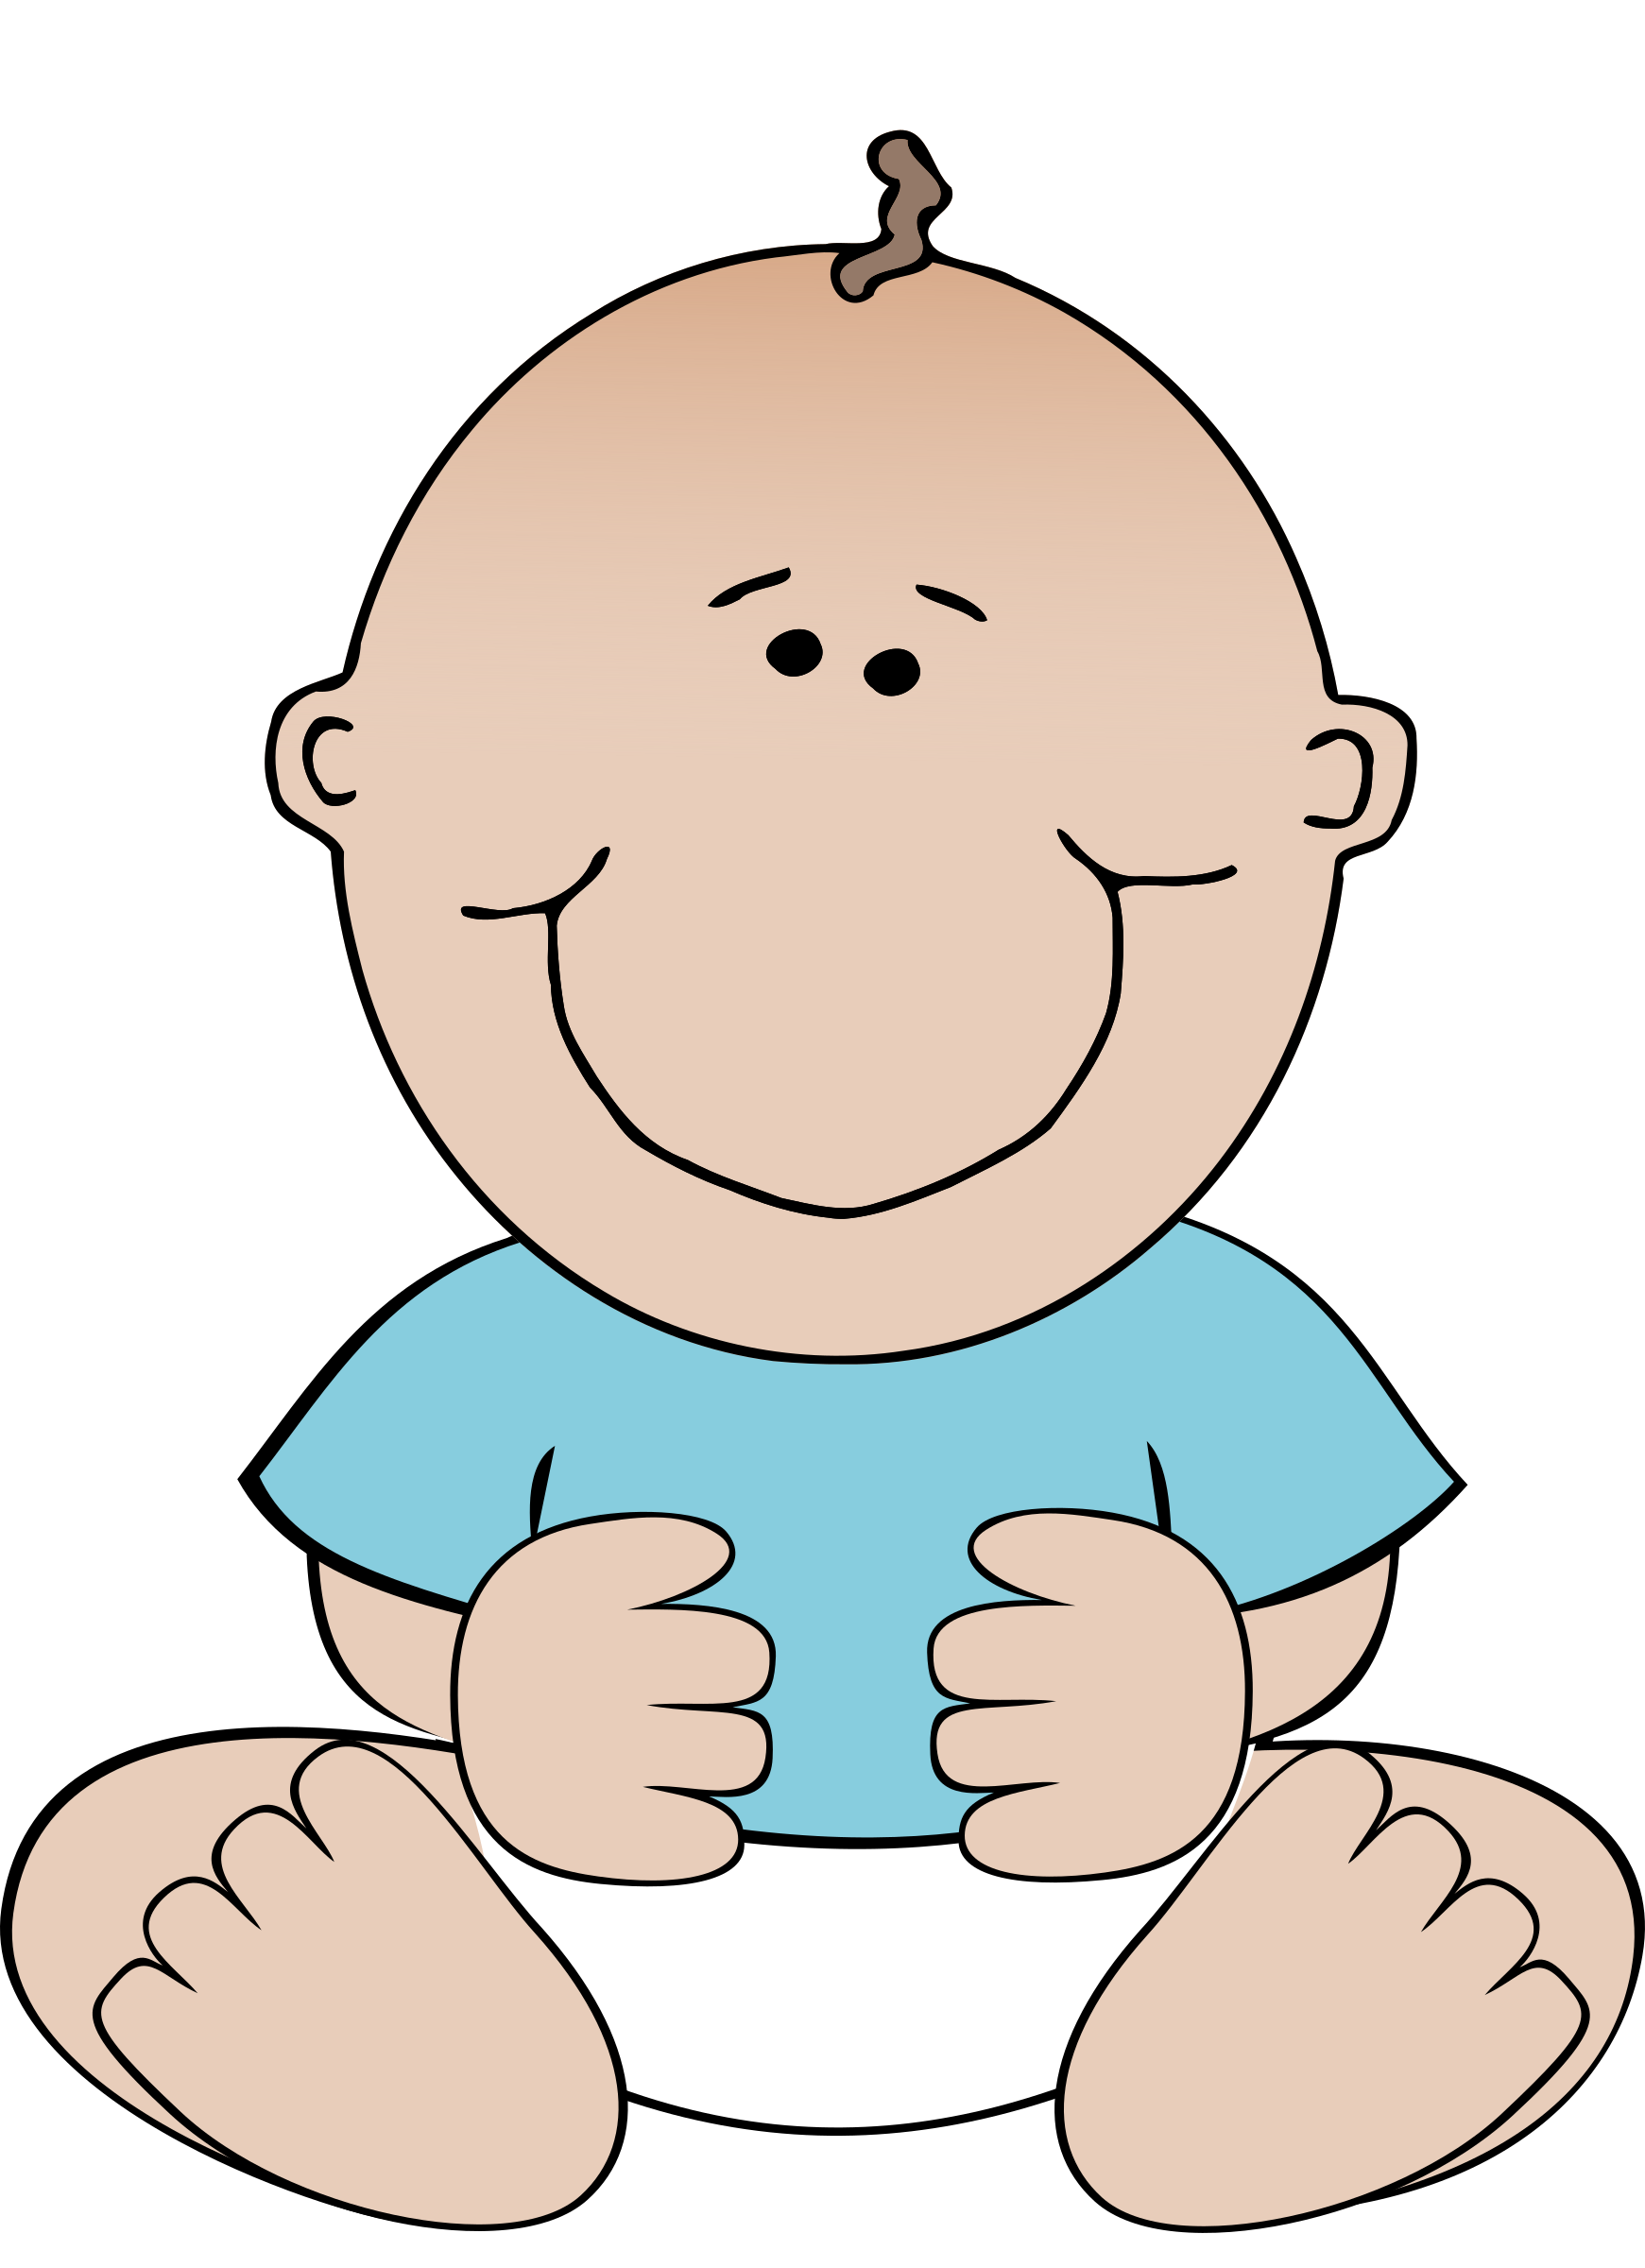 free vector baby clipart - photo #27